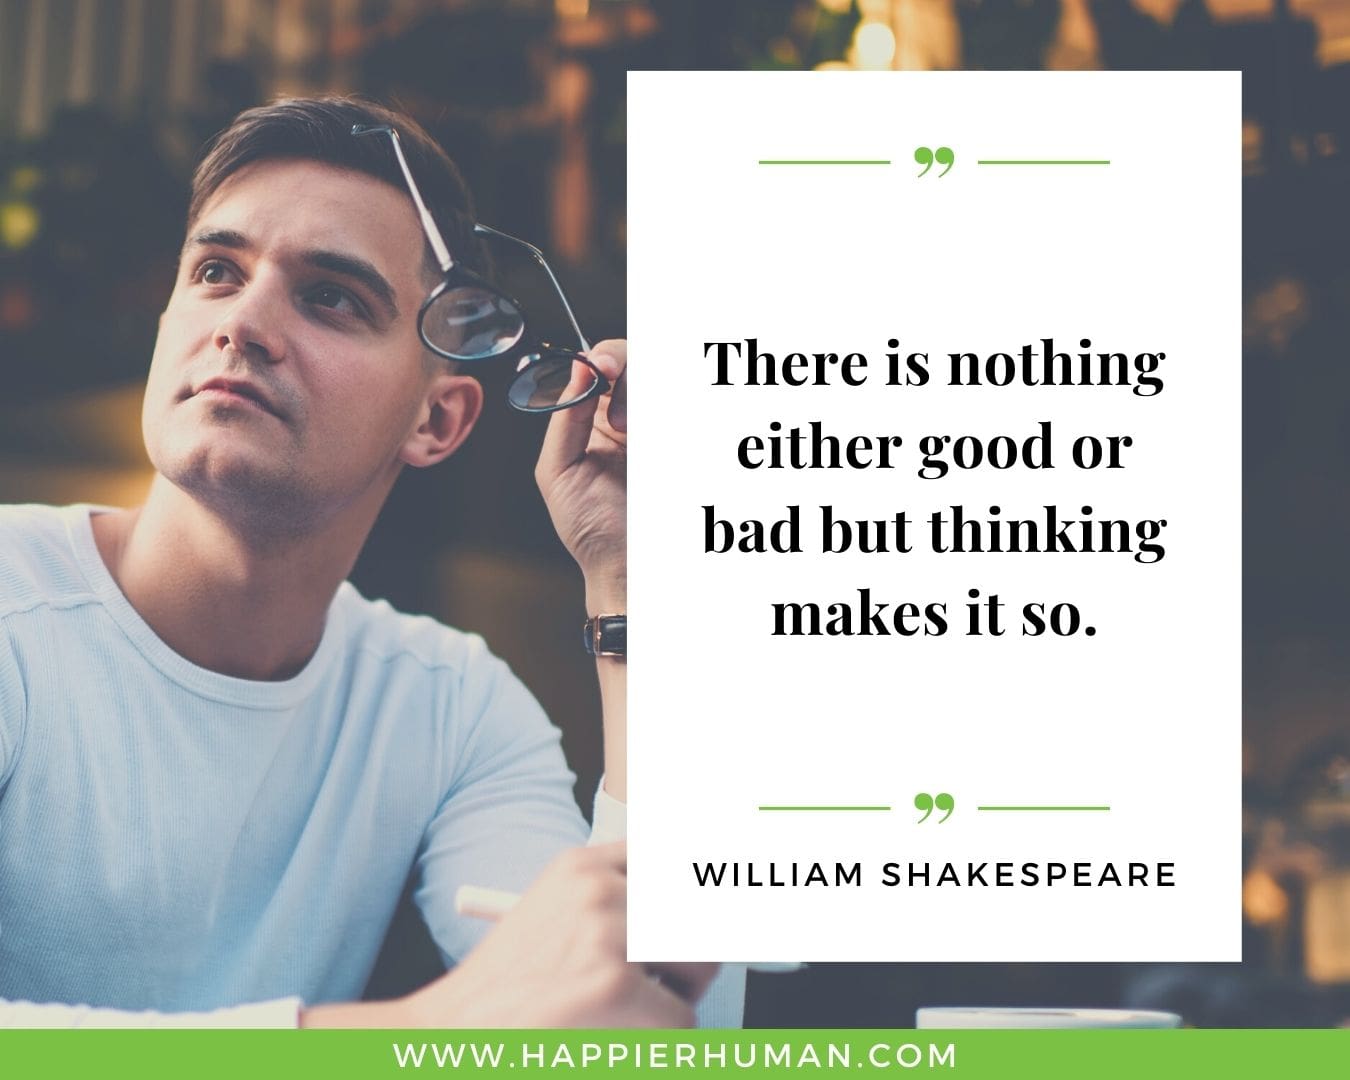 Overthinking Quotes - “There is nothing either good or bad but thinking makes it so.” - William Shakespeare